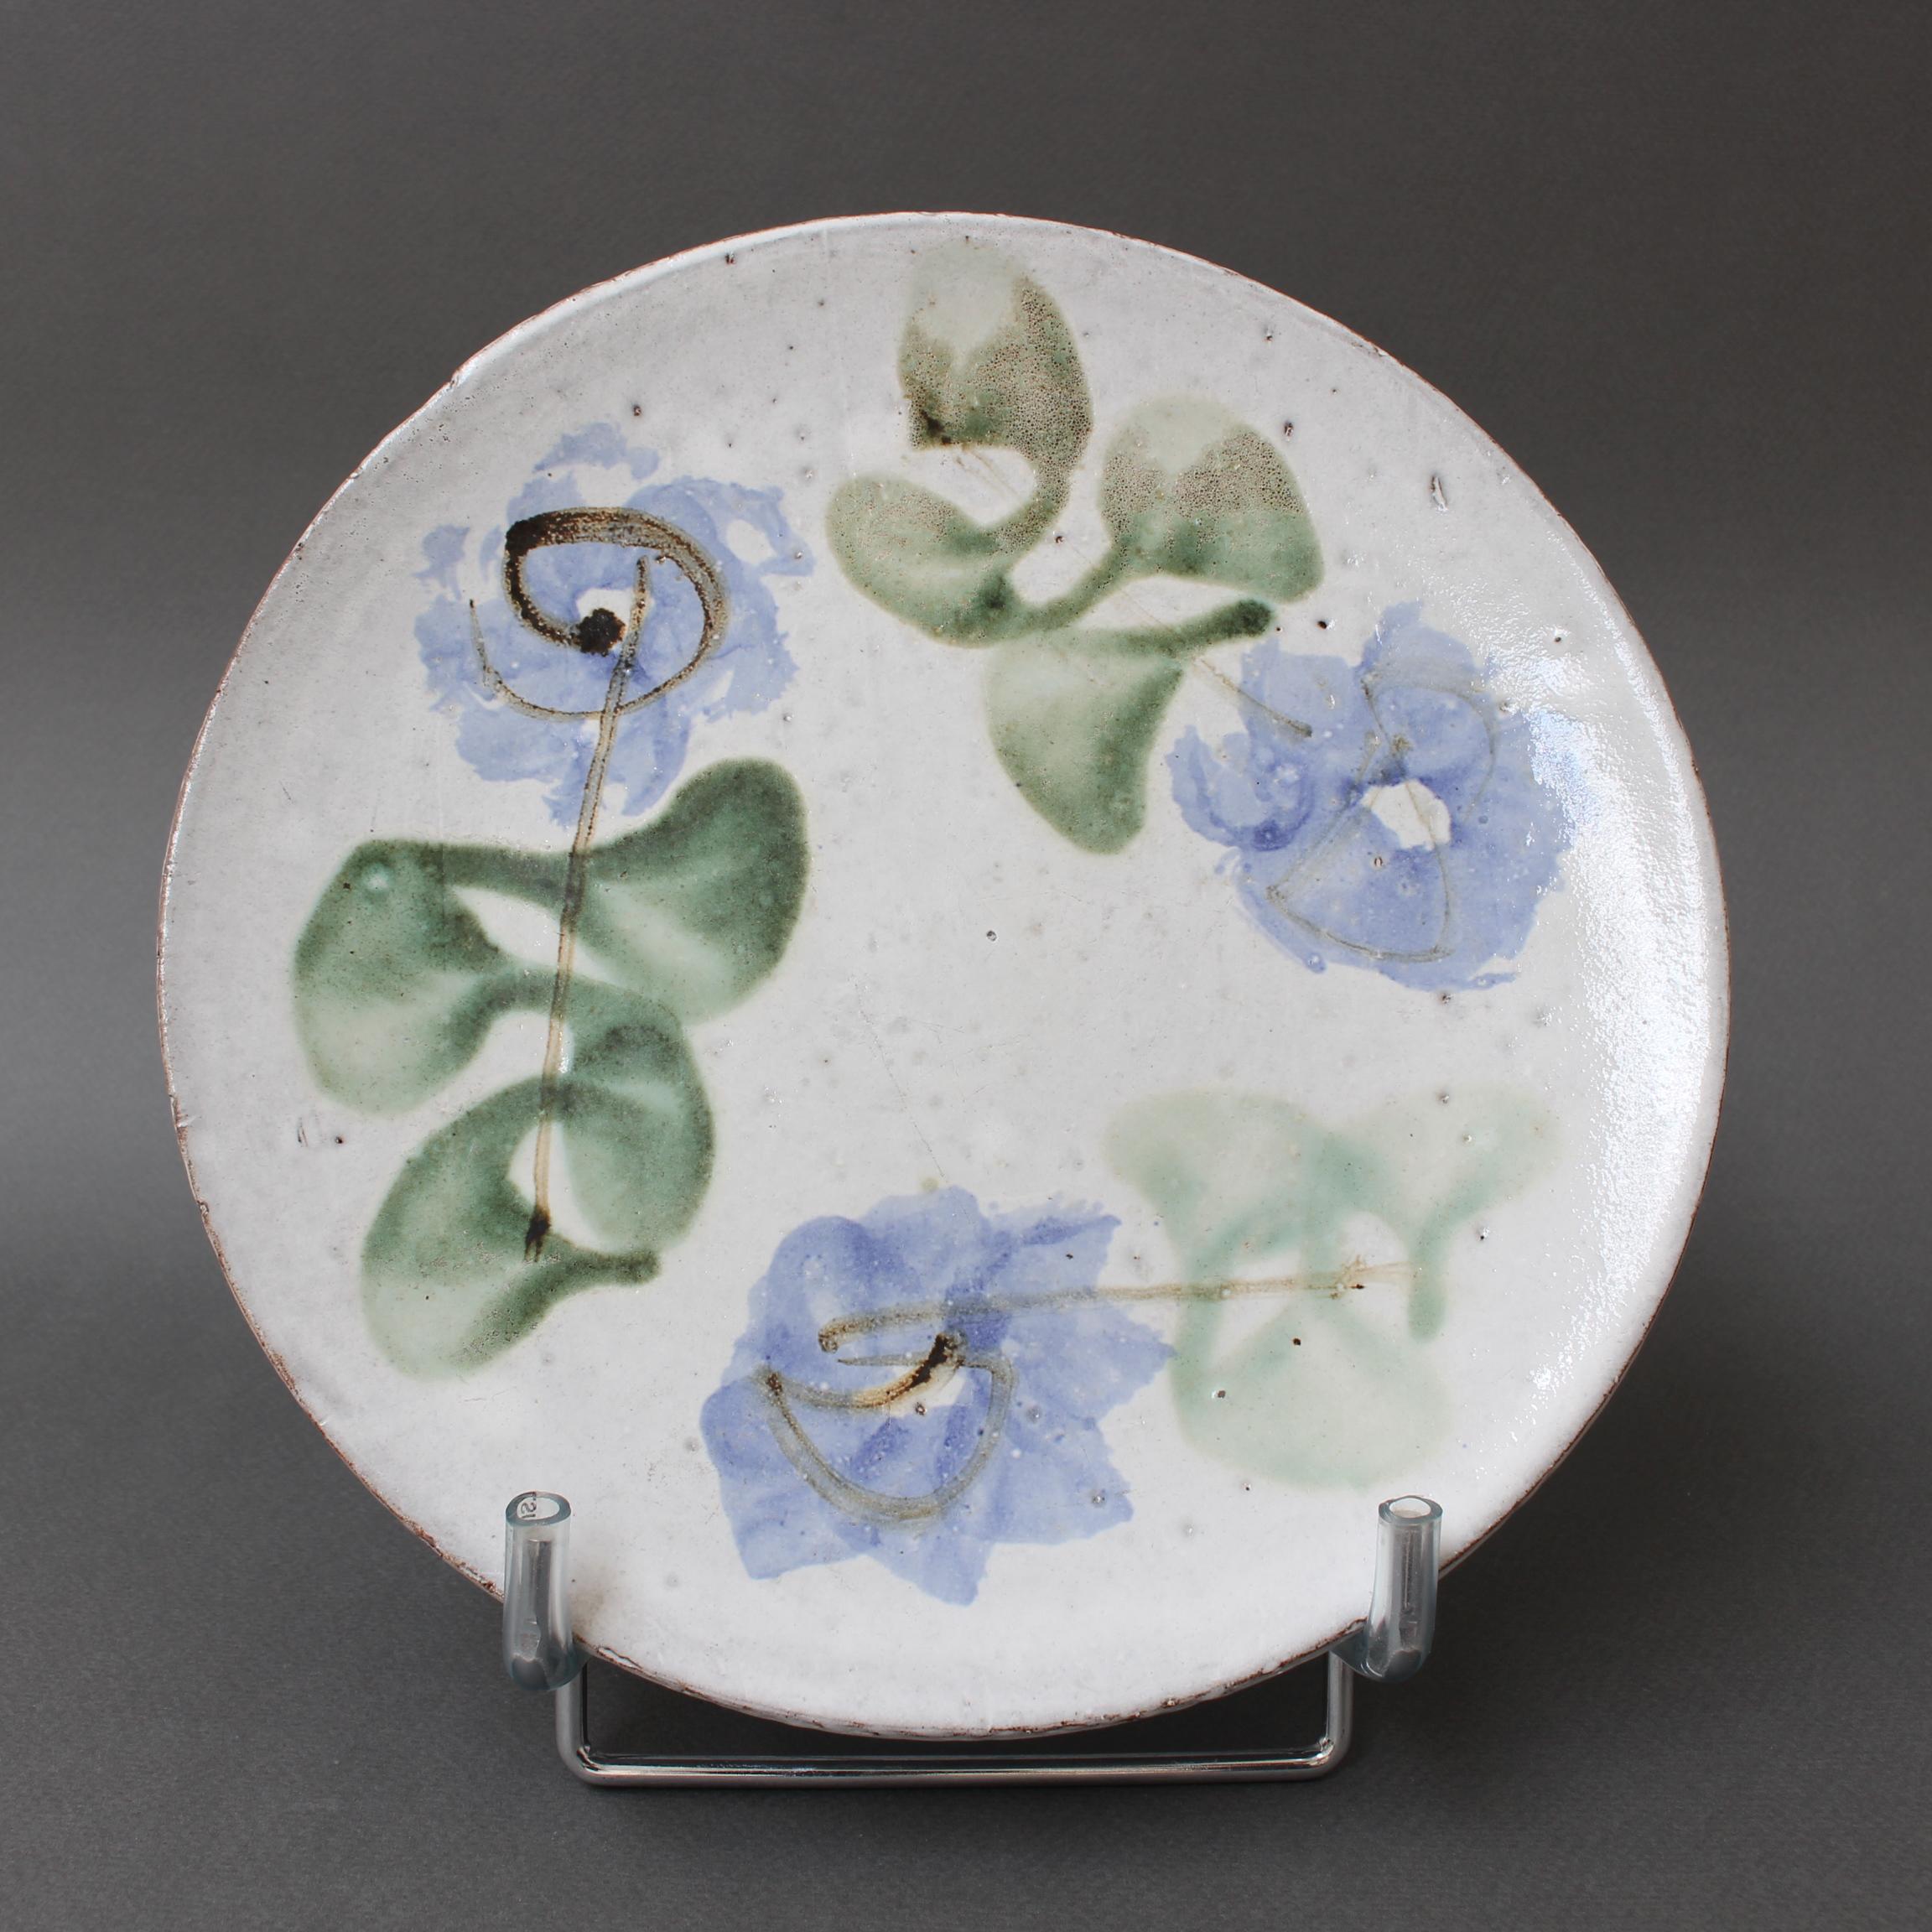 Set of six French vintage ceramic plates (circa 1960s) by Albert Thiry. With the trademark Thiry design and decoration scheme, these plates' base colour is done in a chalky-white glaze with painted blue flowers and green leaves. They are elegantly